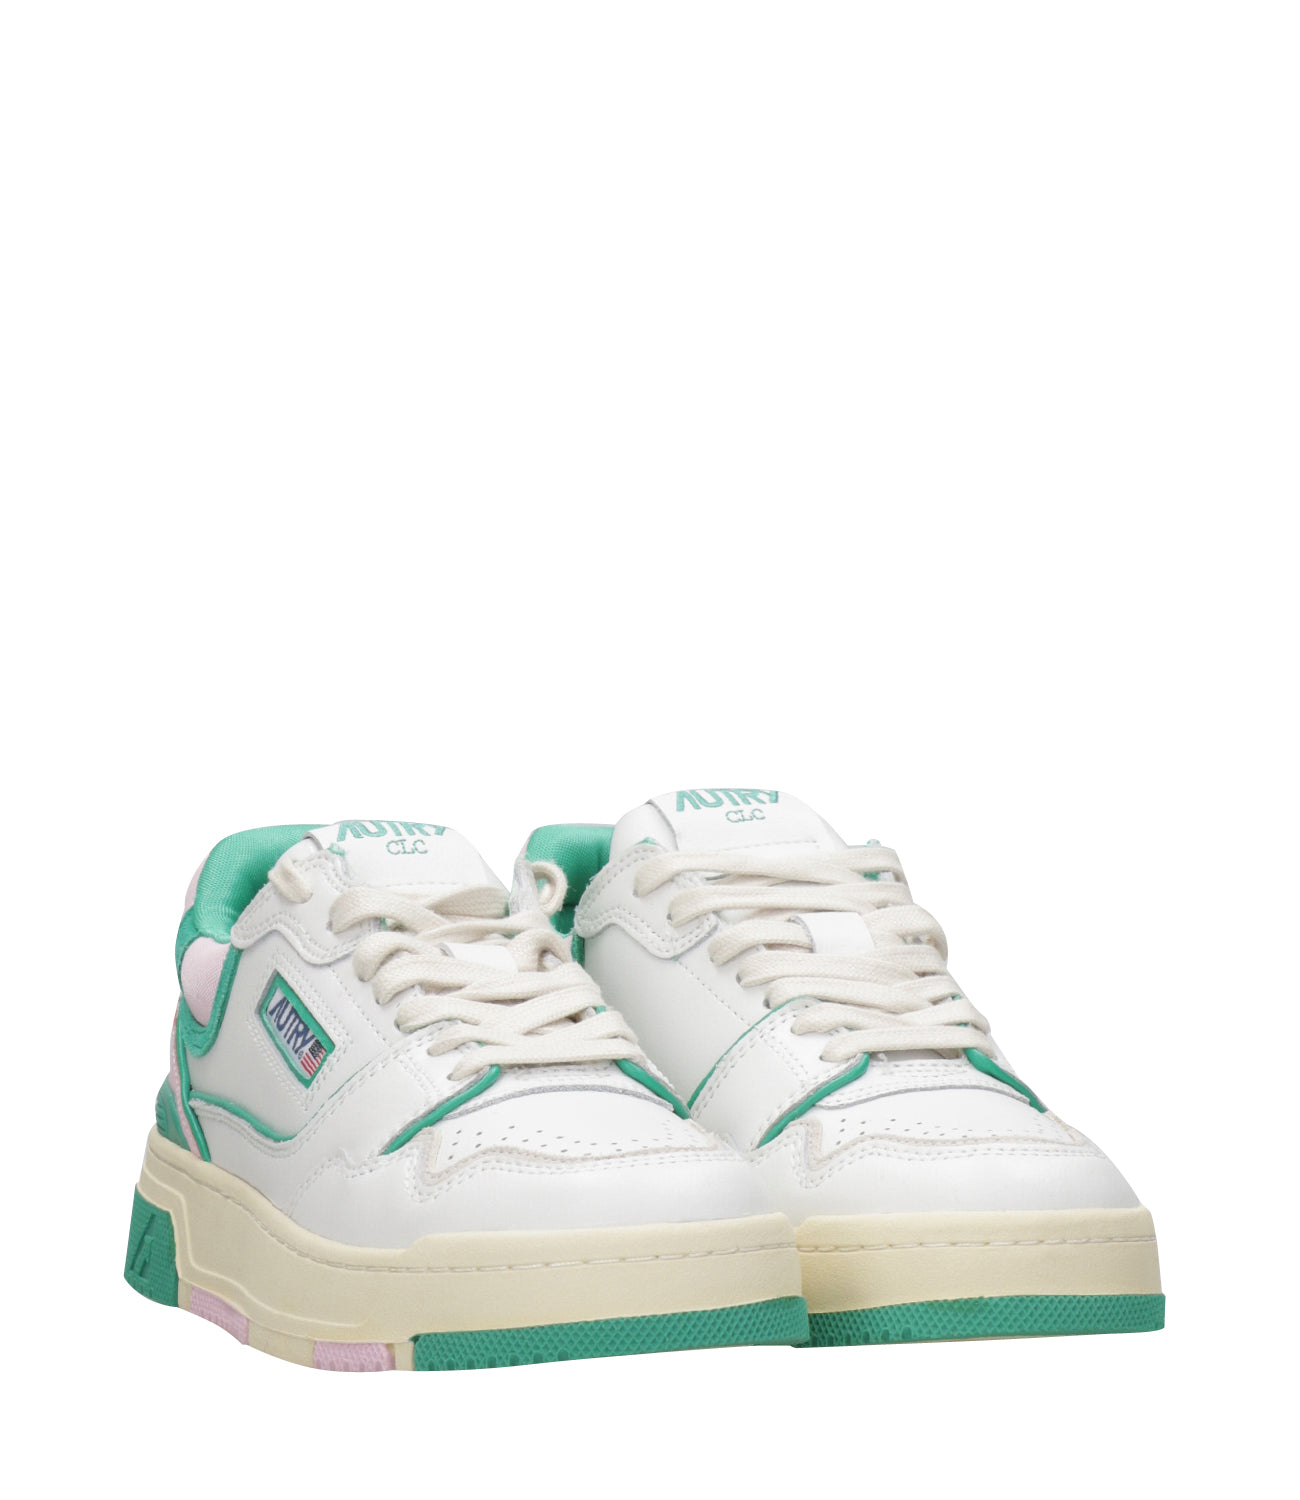 Autry | Sneakers Clc White, Green and Pink